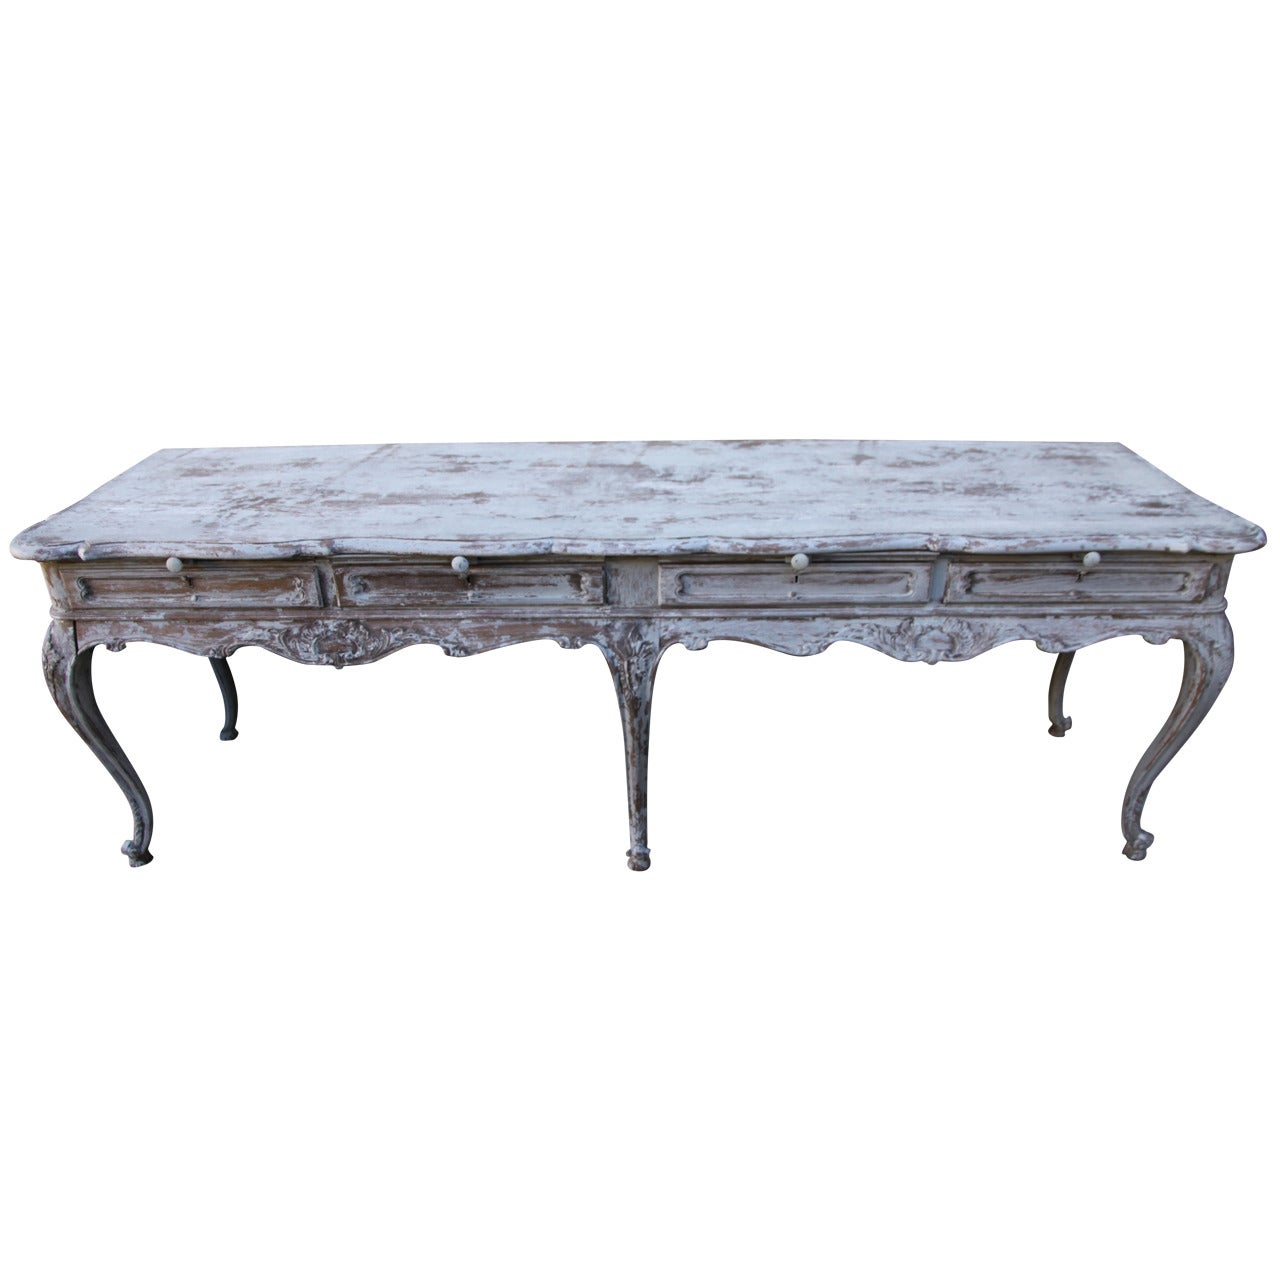 19th Century French Painted Table with Drawers and Pull-Outs